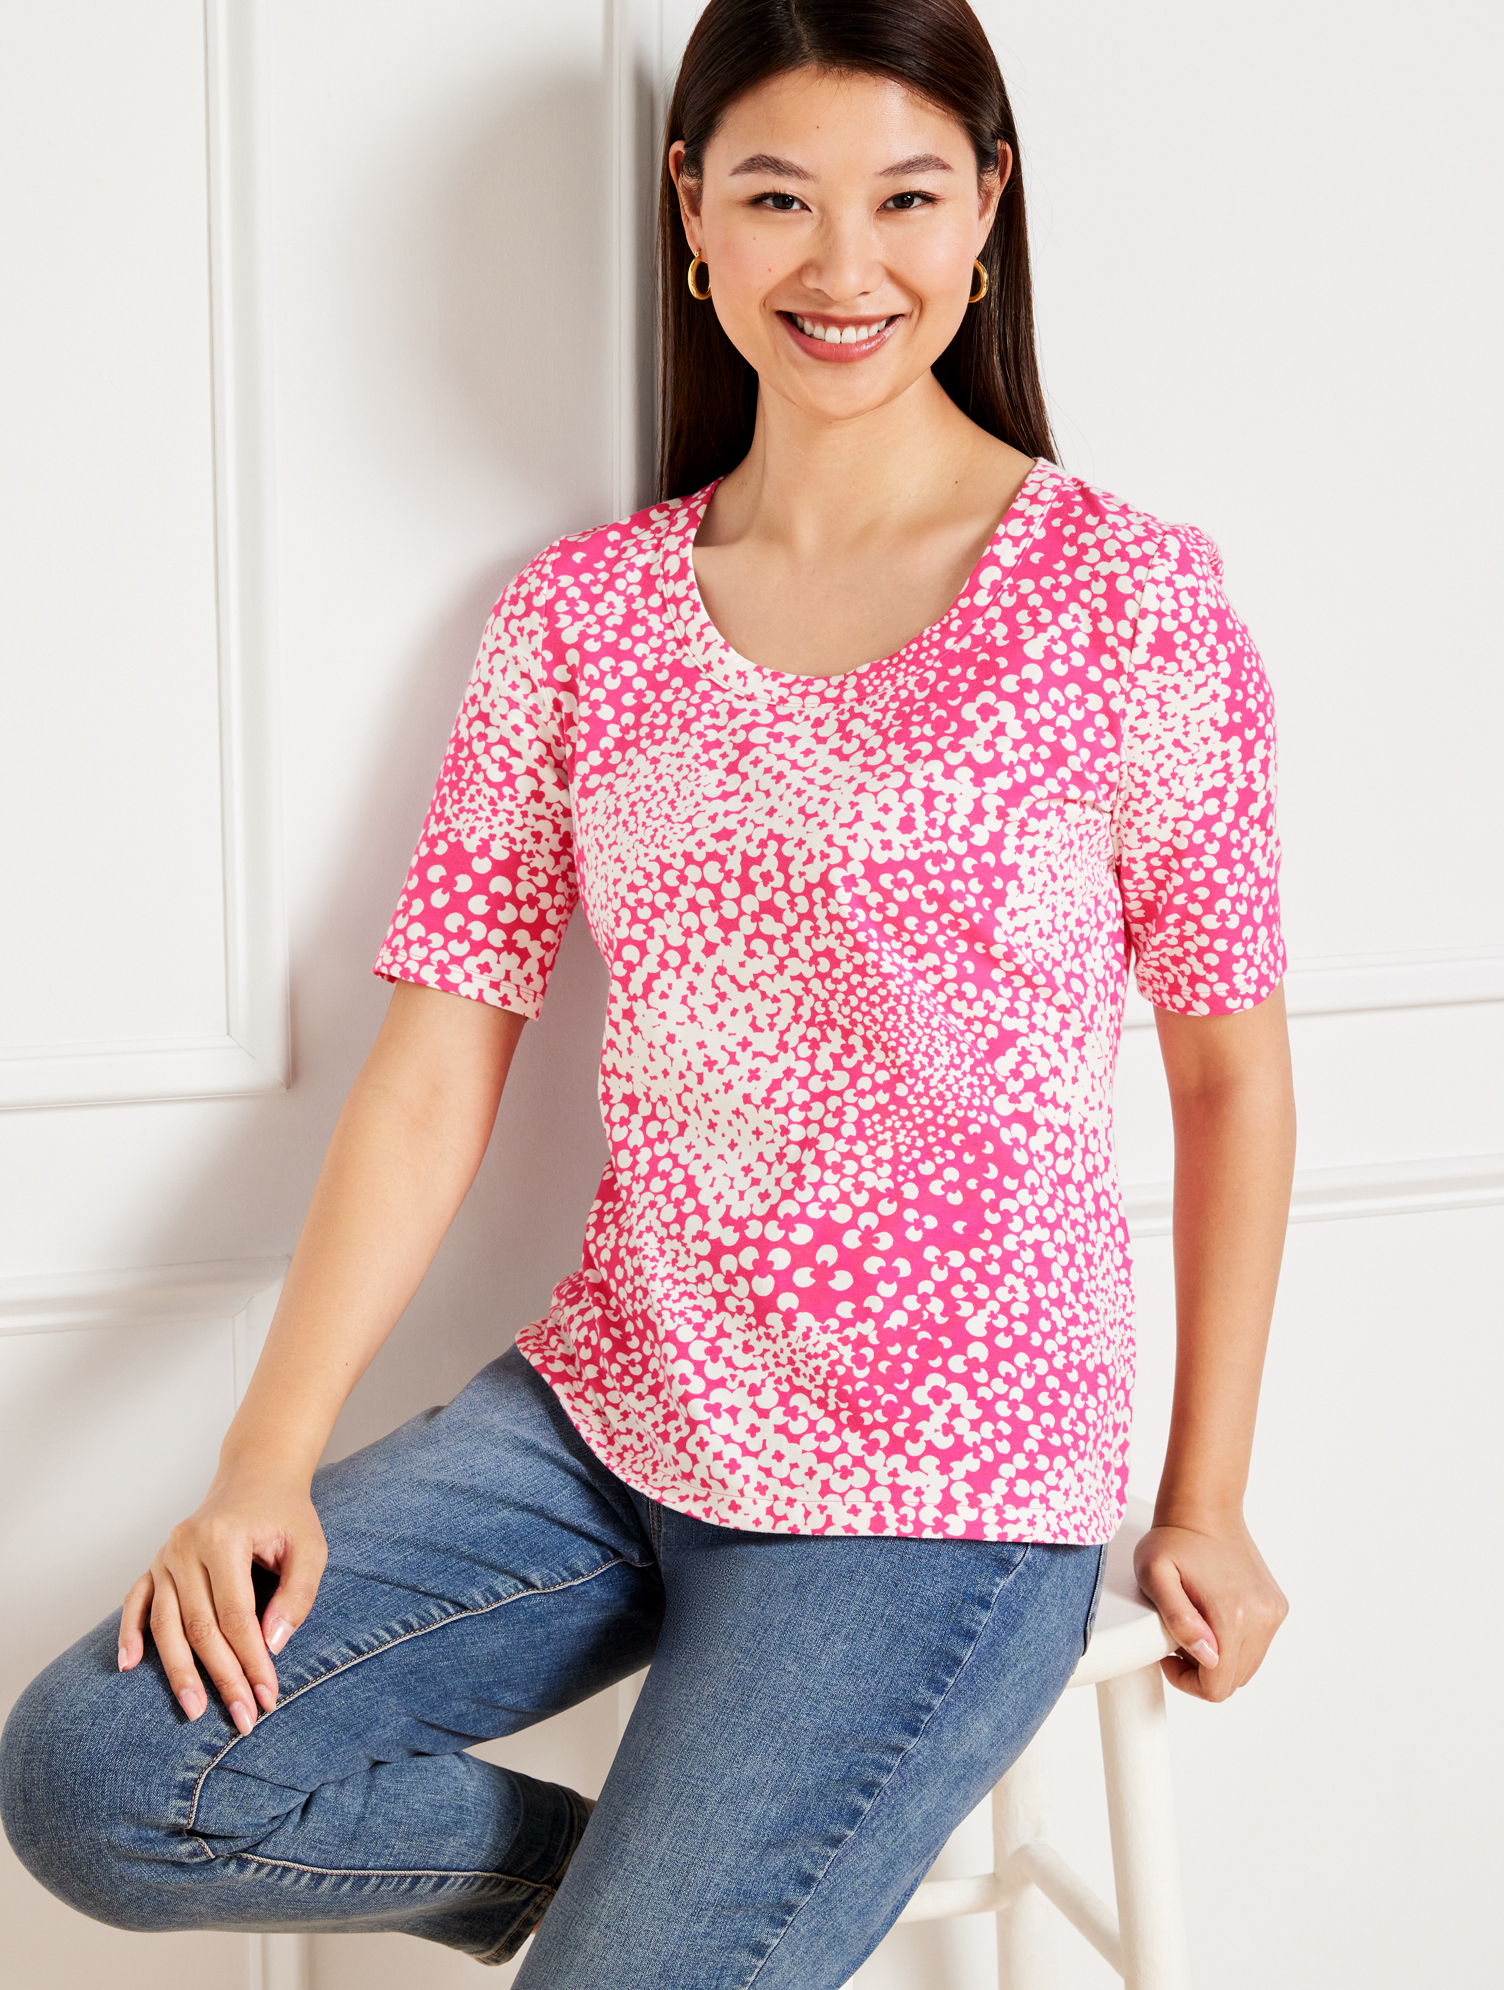 Talbots Scoop Neck T-shirt - Abstract Clovers - Pink Geranium/ivory - Xs  In Pink Geranium,ivory